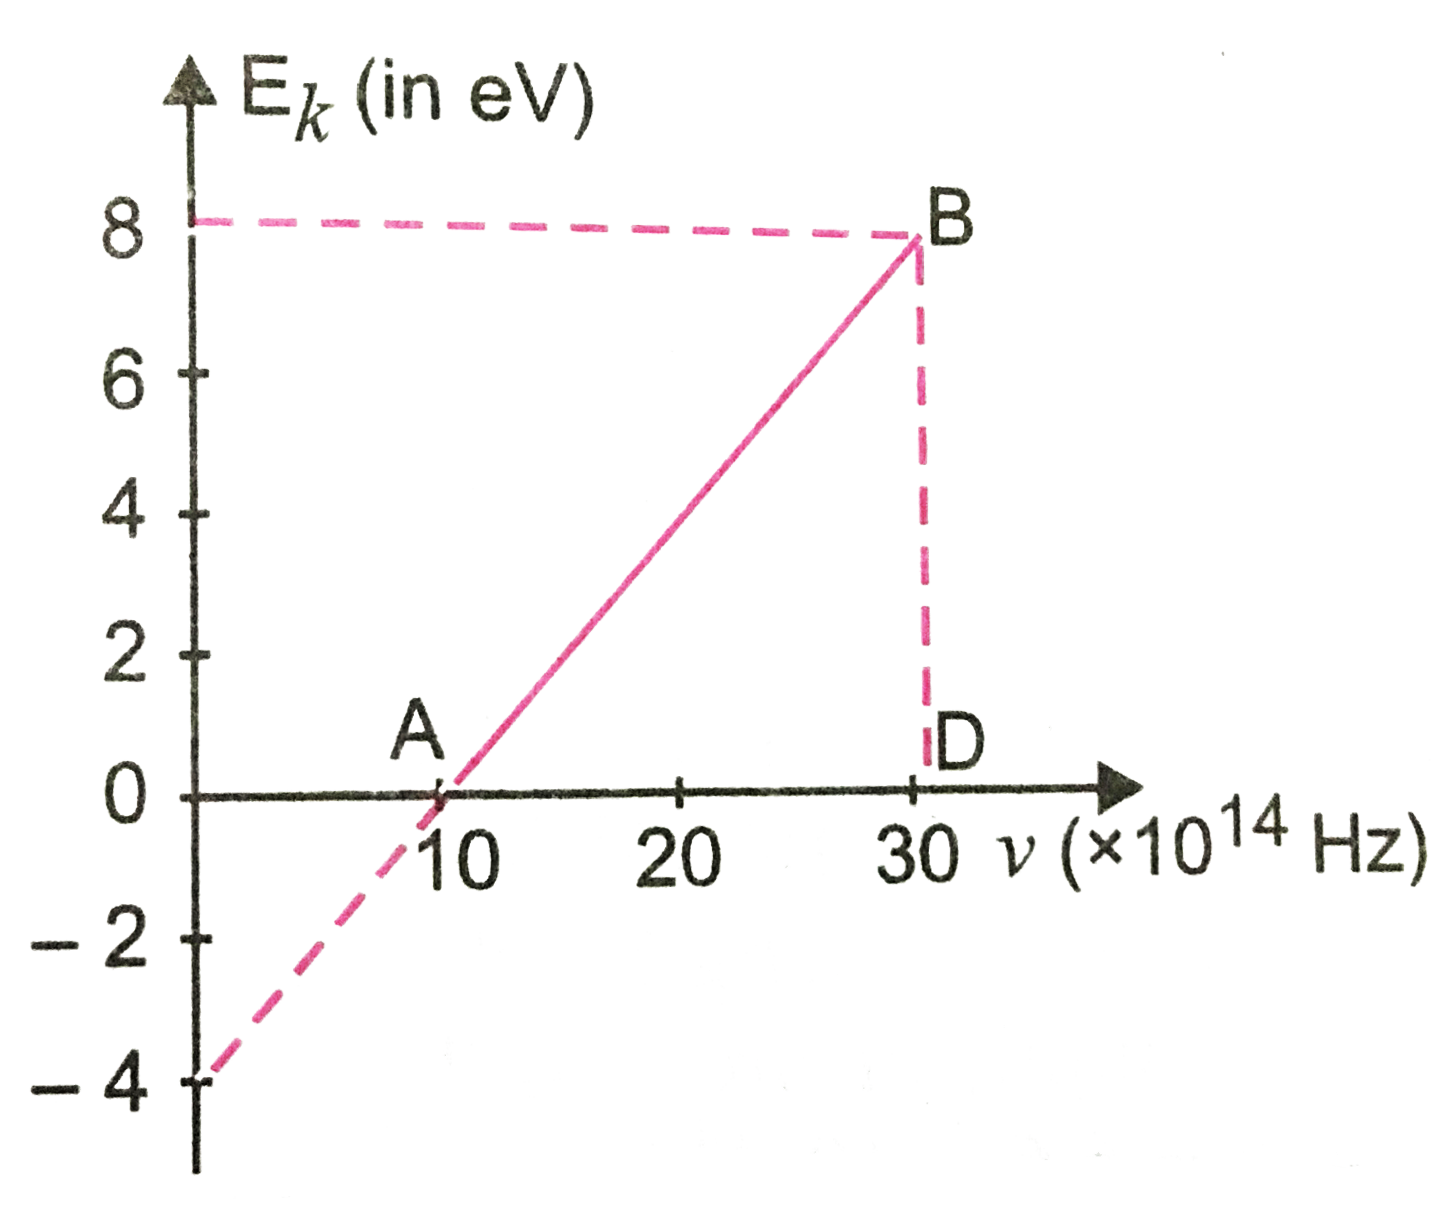 Given in fig. is the graph between frequency v of the incident light and maximum kinetiec energy (E(k)) of the emitted photoelectrons. Find the values of (i) threshold frequency and (ii) work function form the graph.